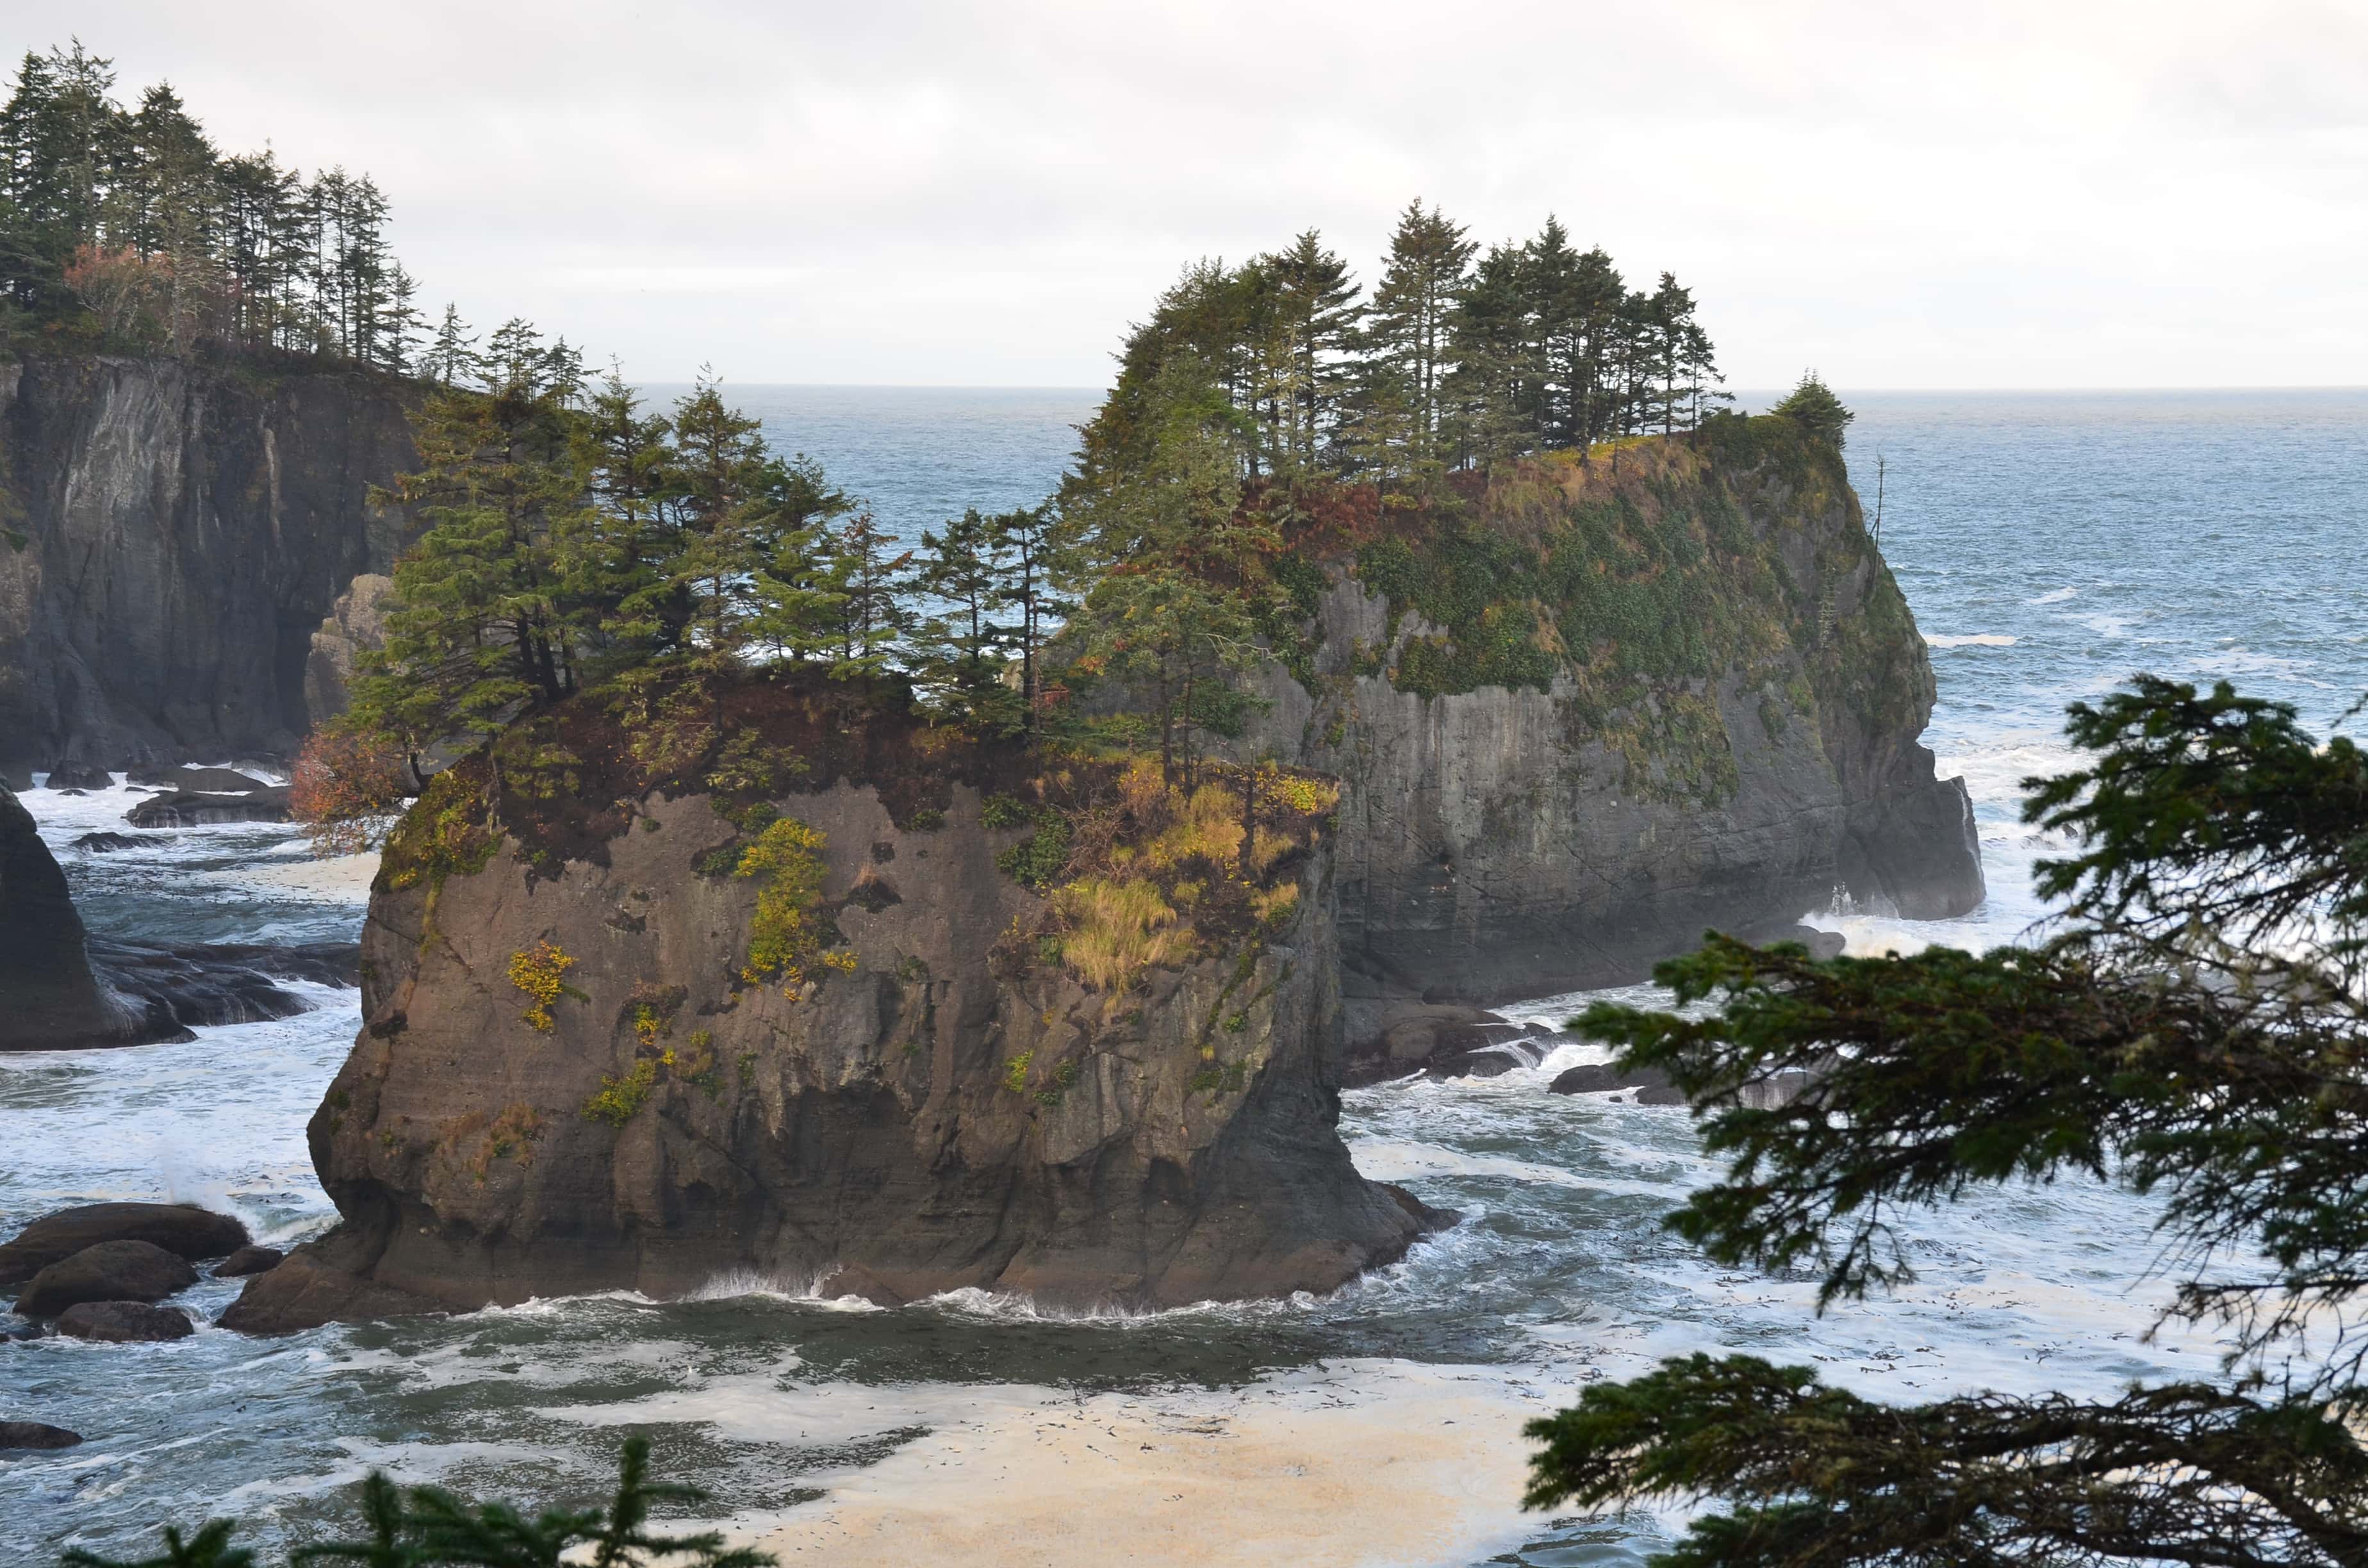 First viewpoint on the Cape Flattery Trail on the Makah Reservation in Washington